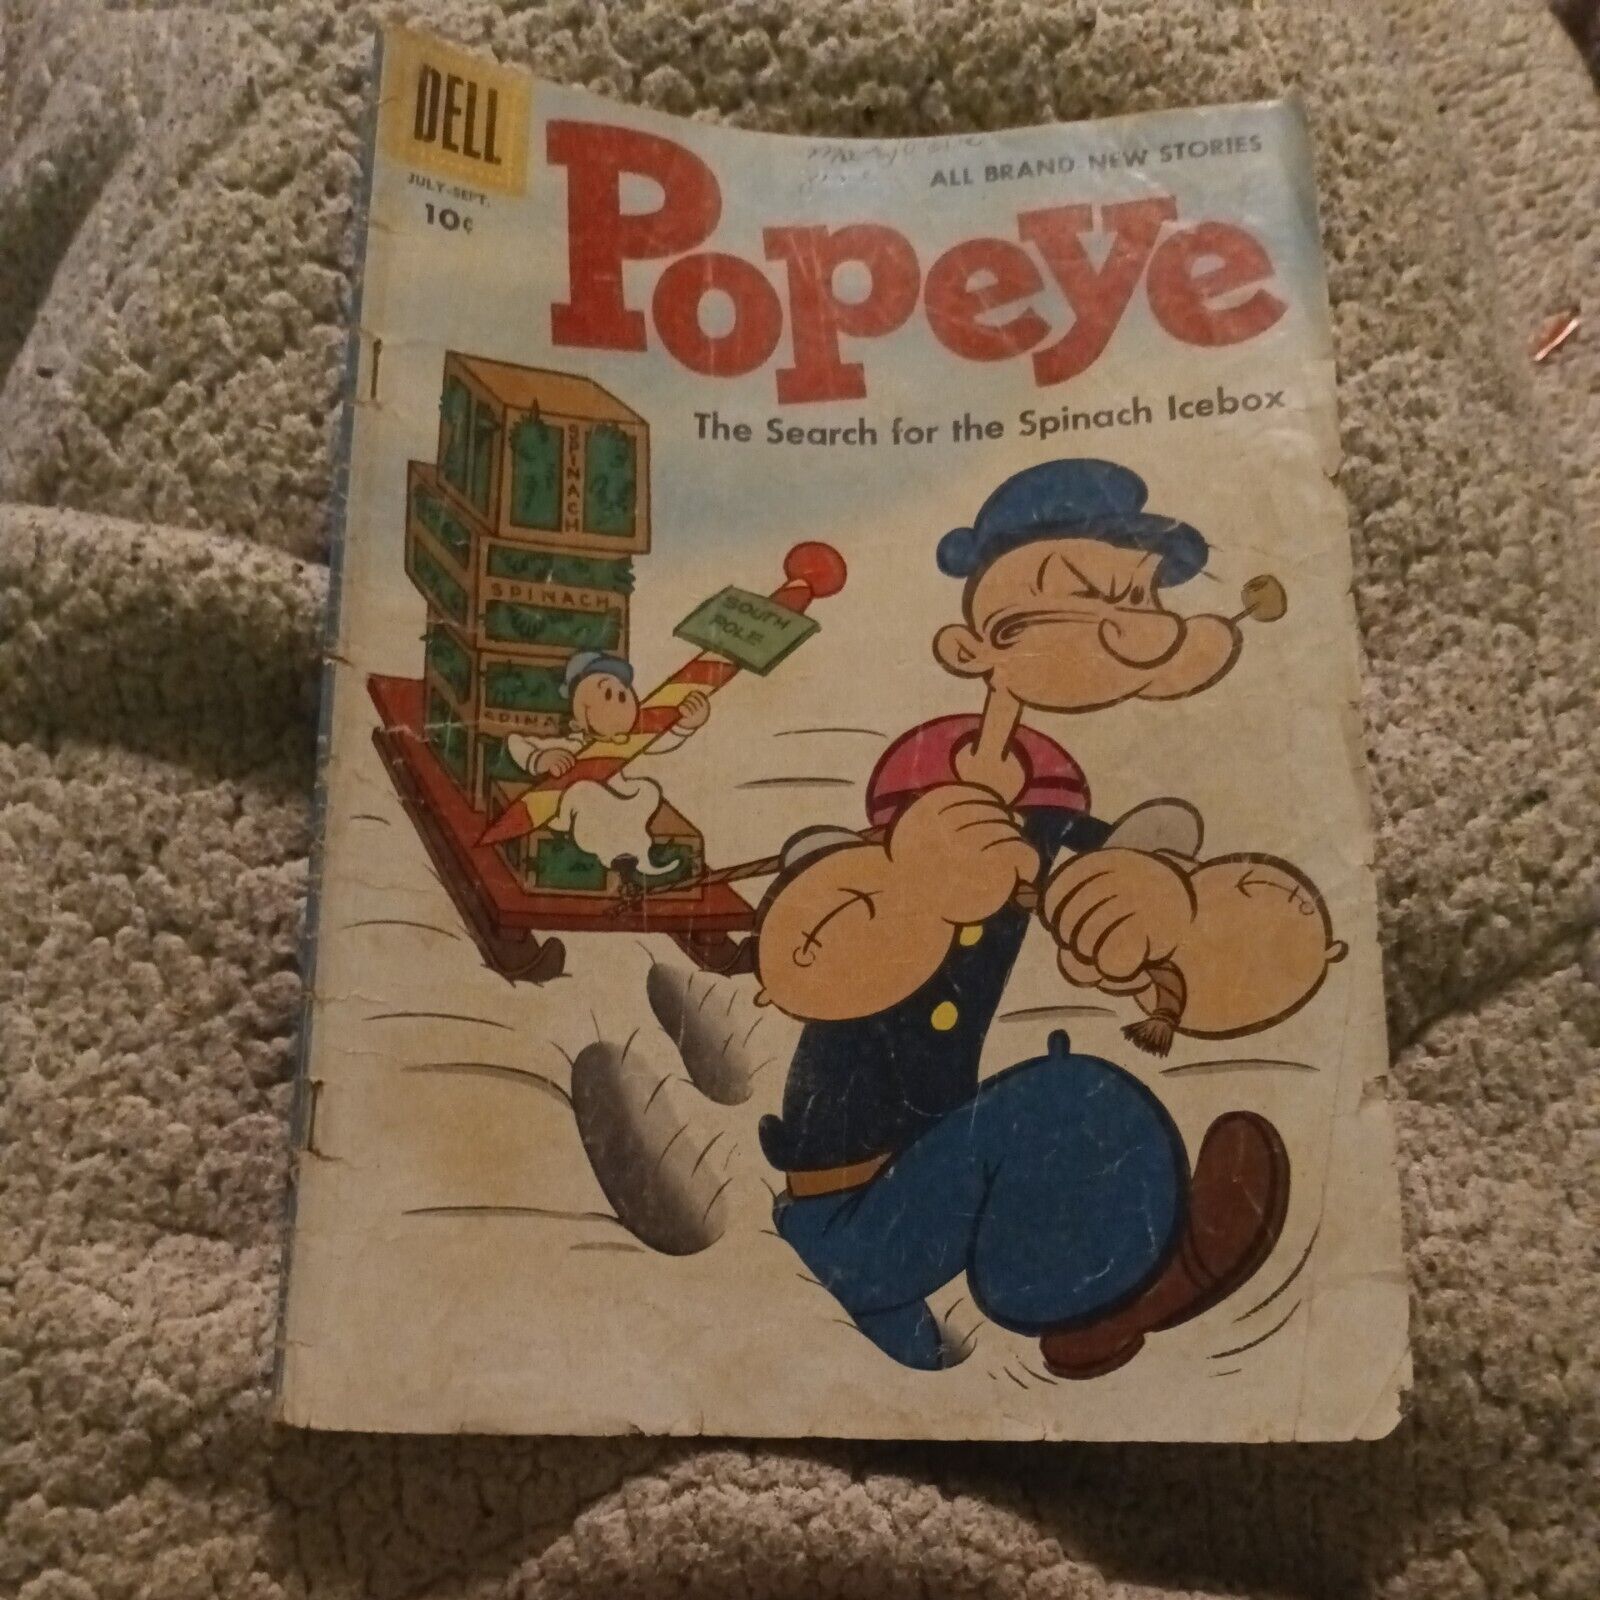 POPEYE-The Search for the Spinach Icebox Vol.1 #37-Dell-1956 10 cent Comic Book.